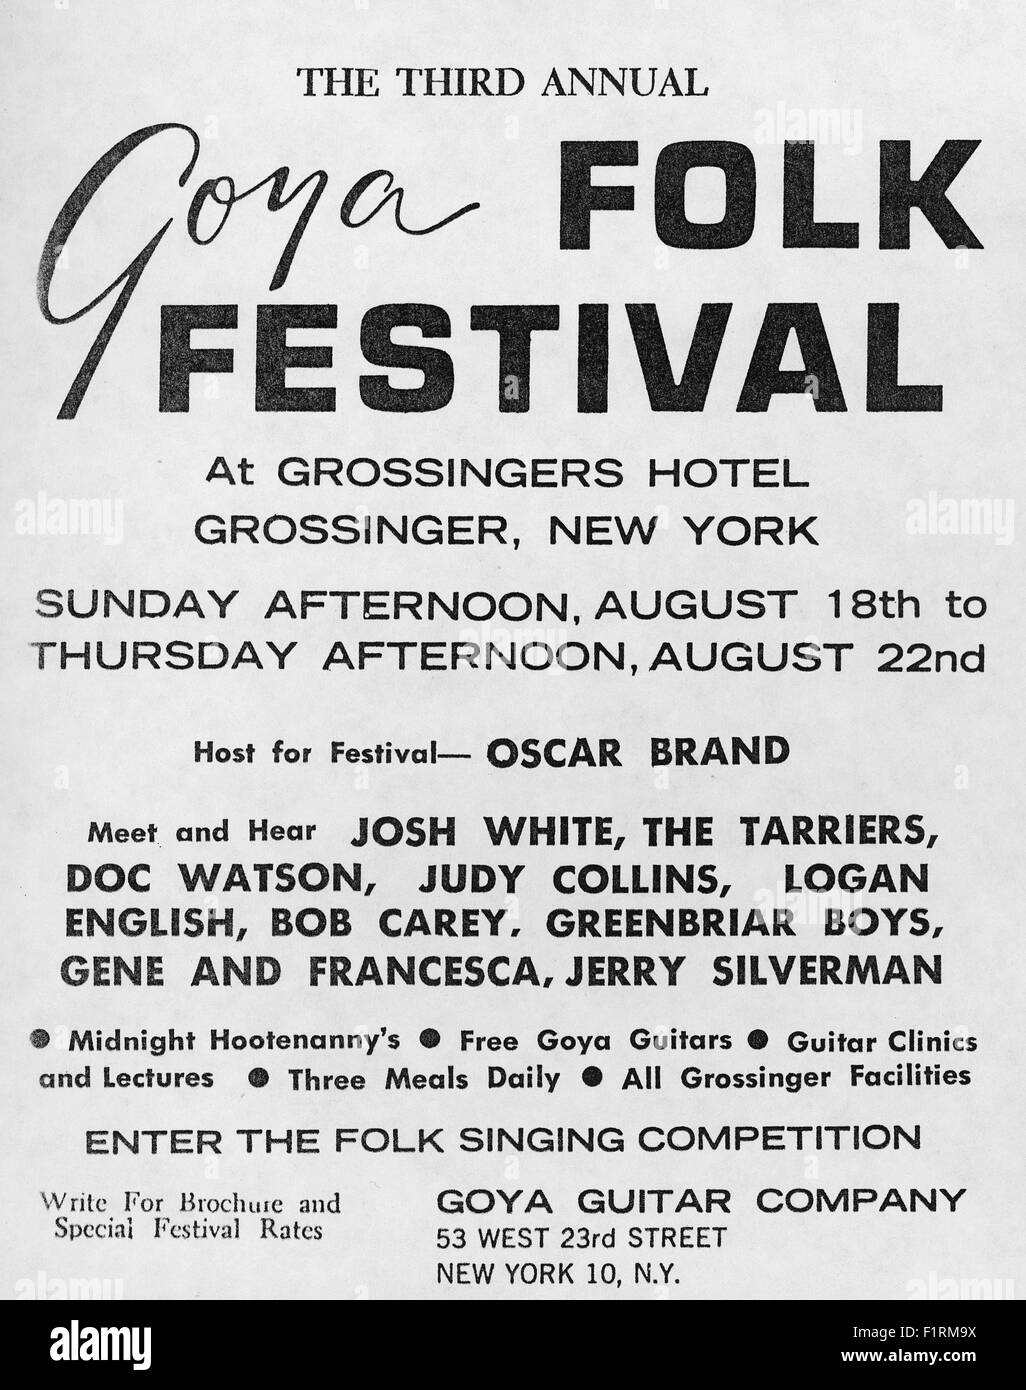 FOLK MUSIC EPHEMERA, circa 1960s. Courtesy Granamour Weems Collection. AD FOR GOYA FOLK FESTIVAL AT GROSSINGER'S HOTEL. Editorial use only. Licensee must obtain appropriate permissions and clearances before using this photo. No rights are granted or implied. Stock Photo